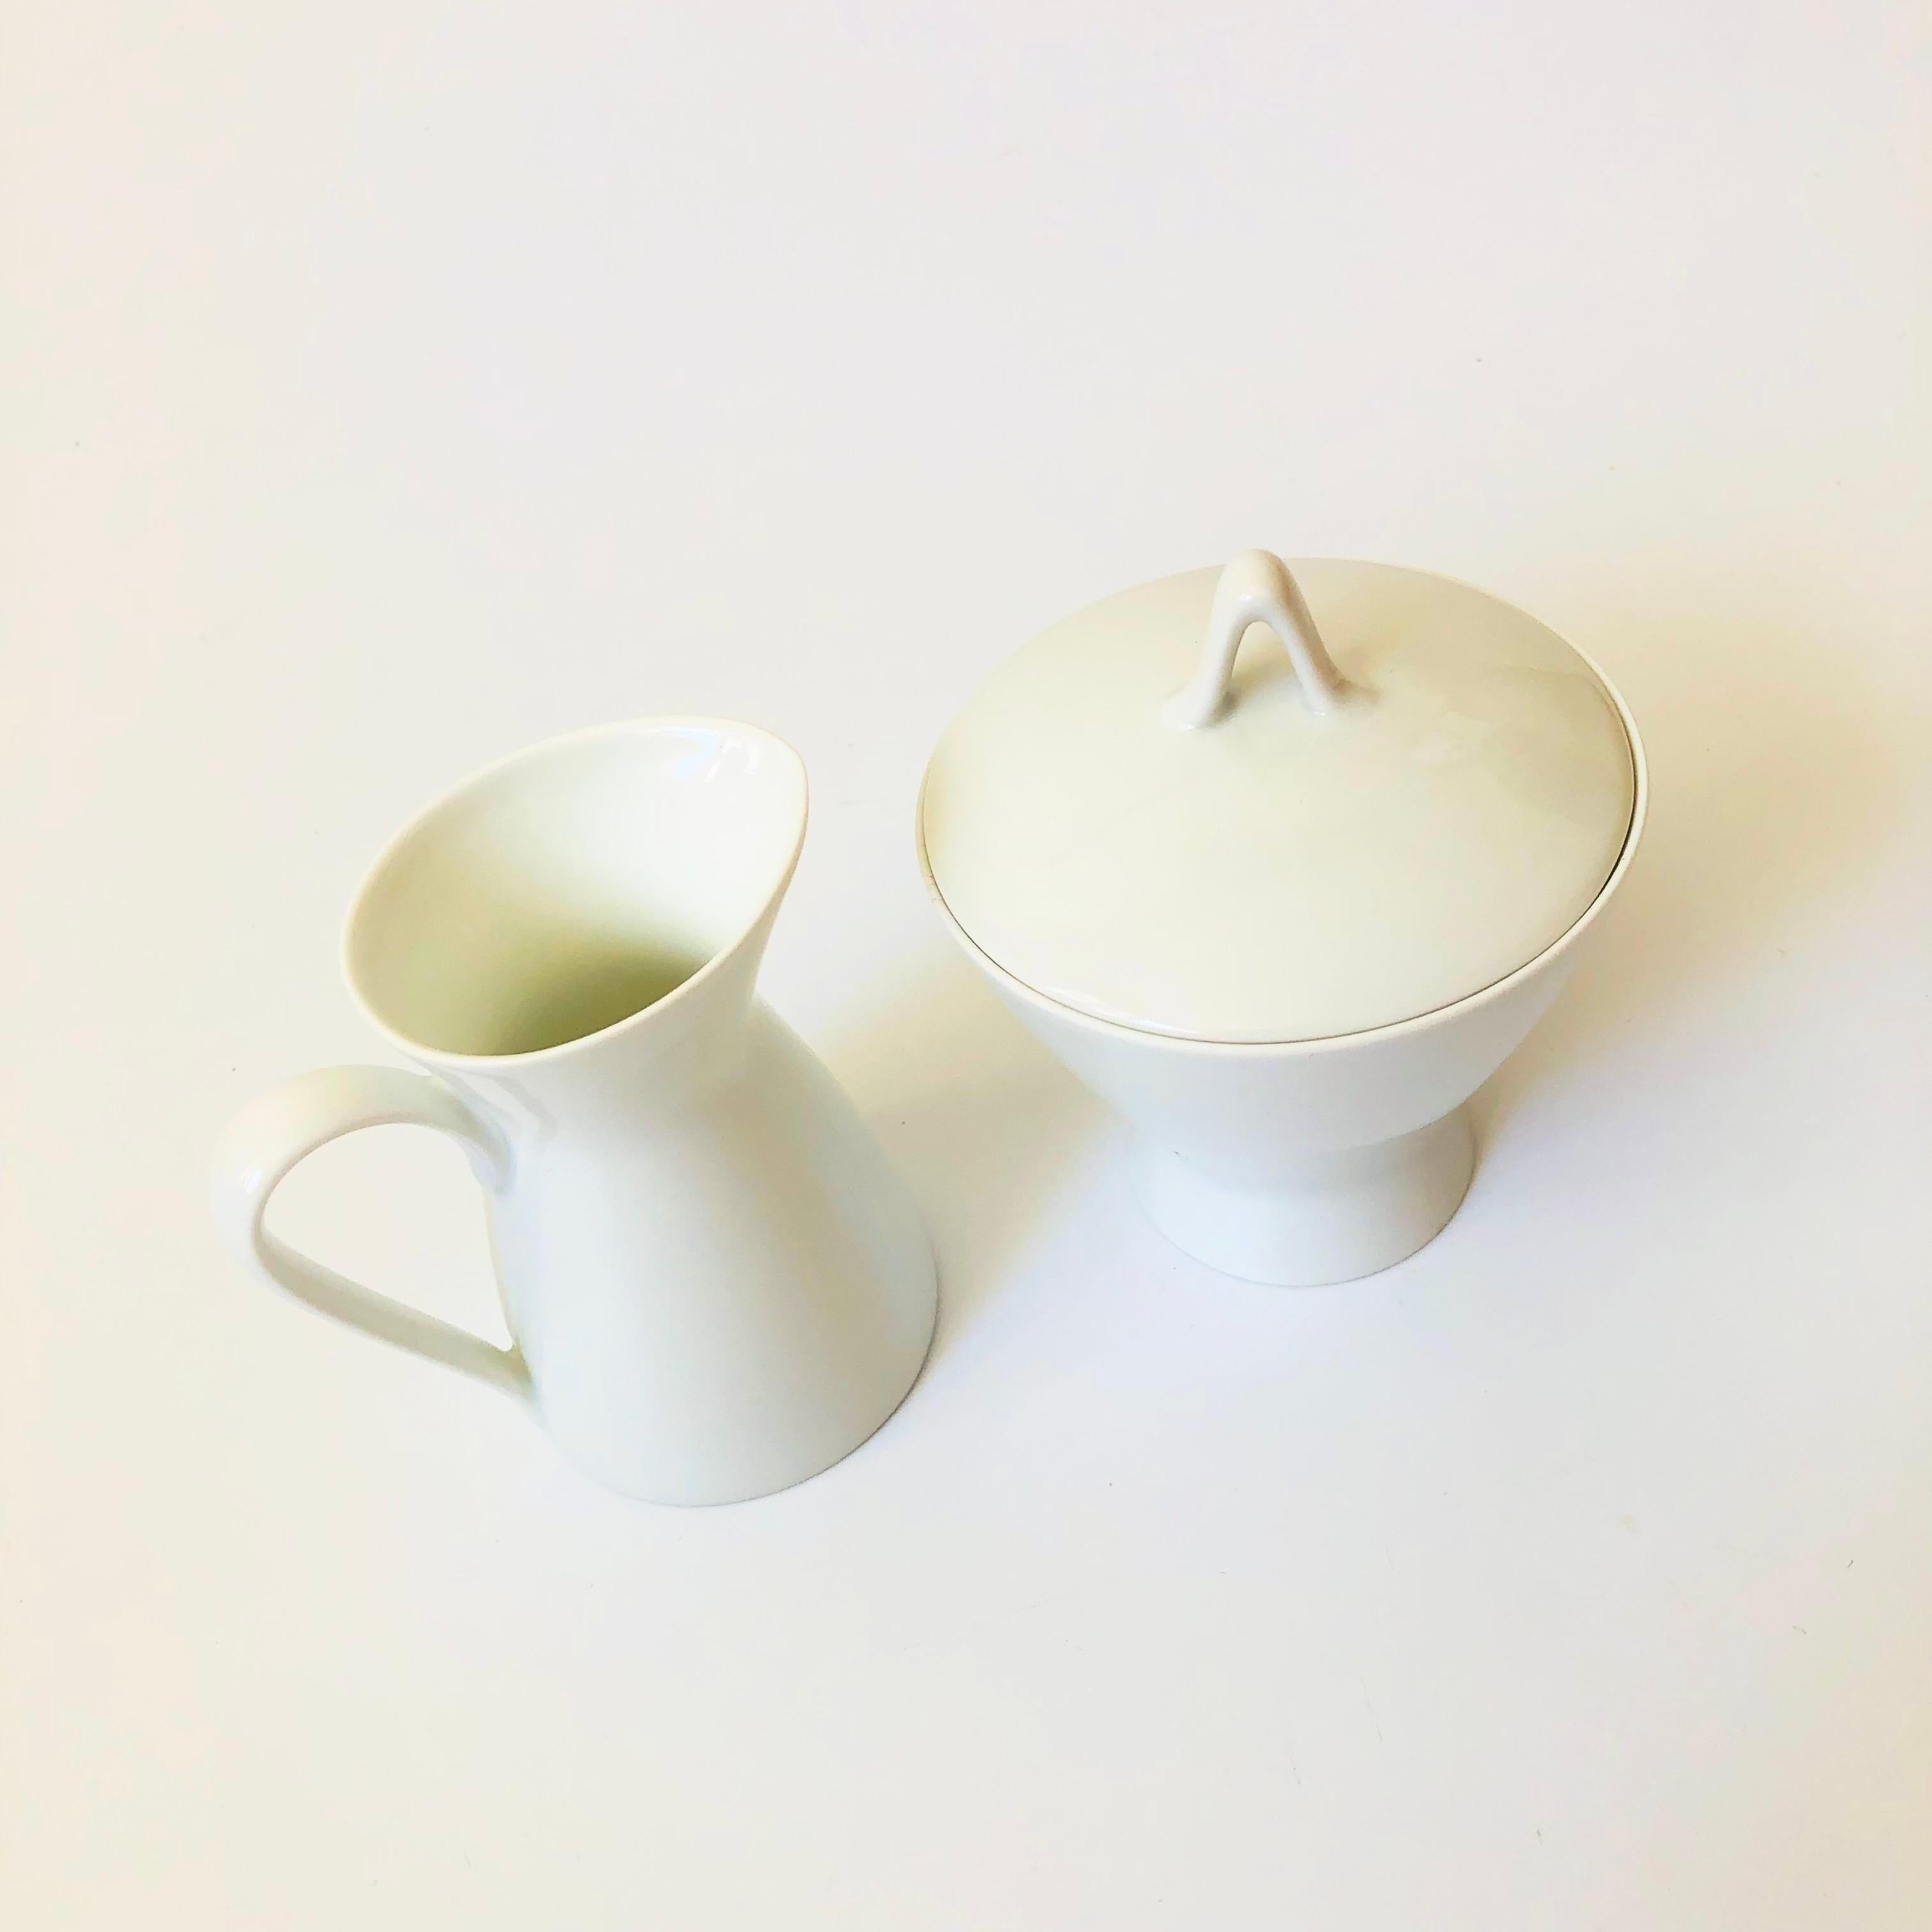 A mid century porcelain creamer and lidded sugar bowl set from the 